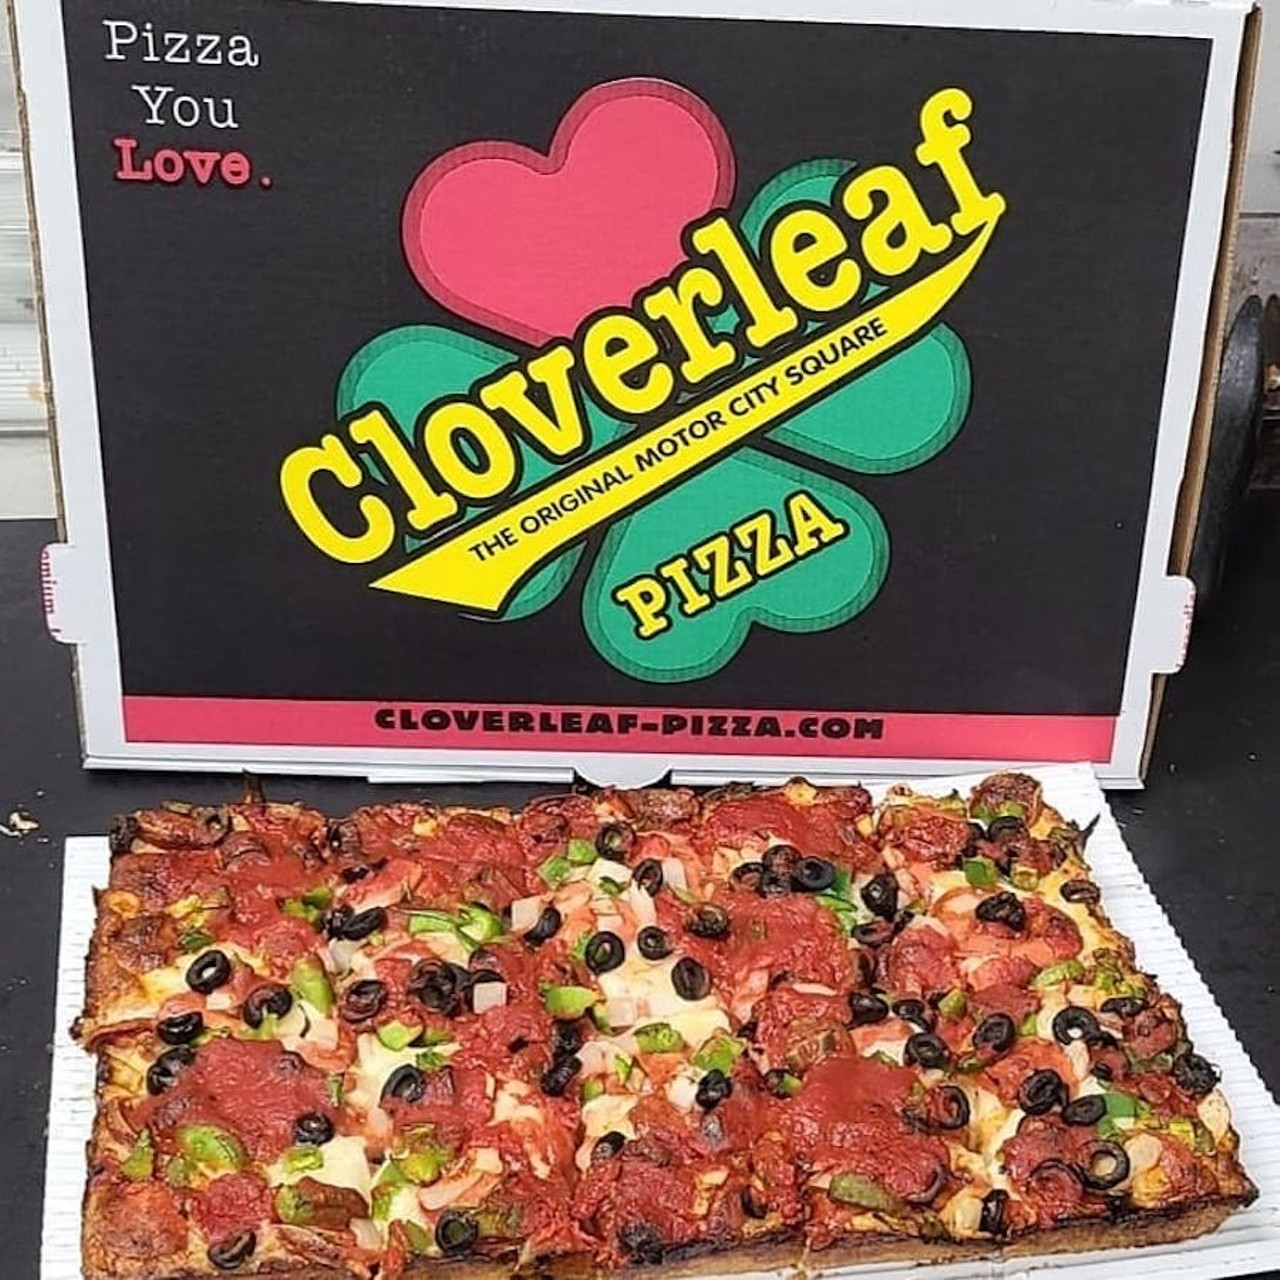 Cloverleaf Pizza
Various locations; cloverleaf-pizza.com 
Another direct descendant of Gus Guerra&#146;s square shaped pizza legacy, Cloverleaf offers a wide variety of premium toppings and gluten free options for those inclined. Be sure to check out their deep dish square bread alongside whatever specialty pizza you order.
Photo via  Cloverleaf Pizza/Facebook